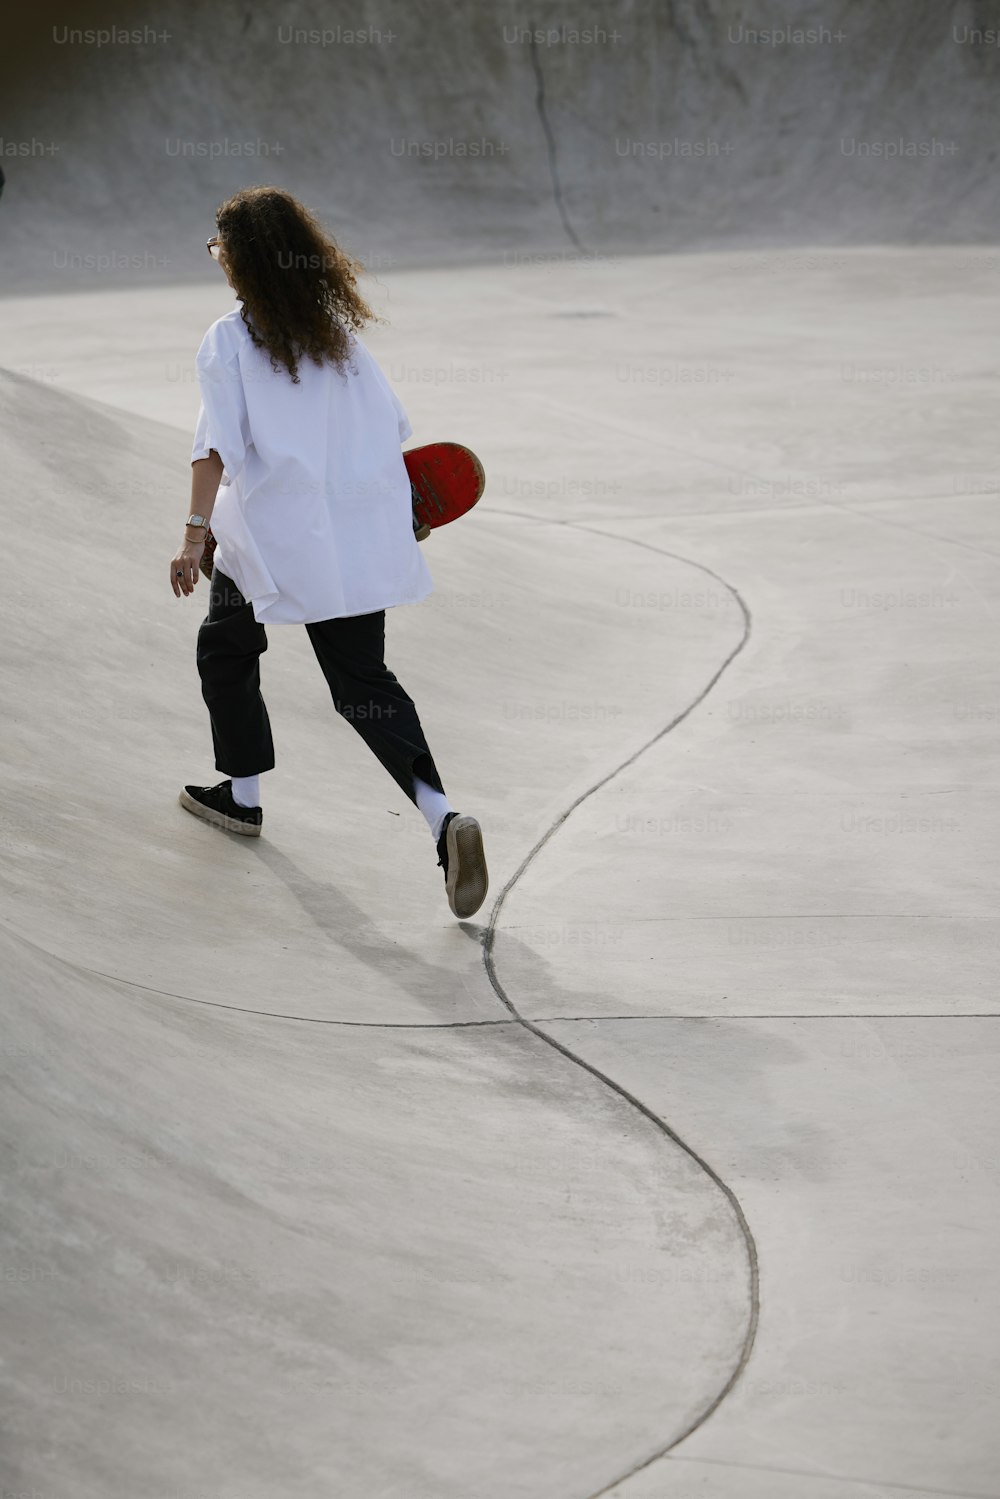 a person riding a skate board on a ramp